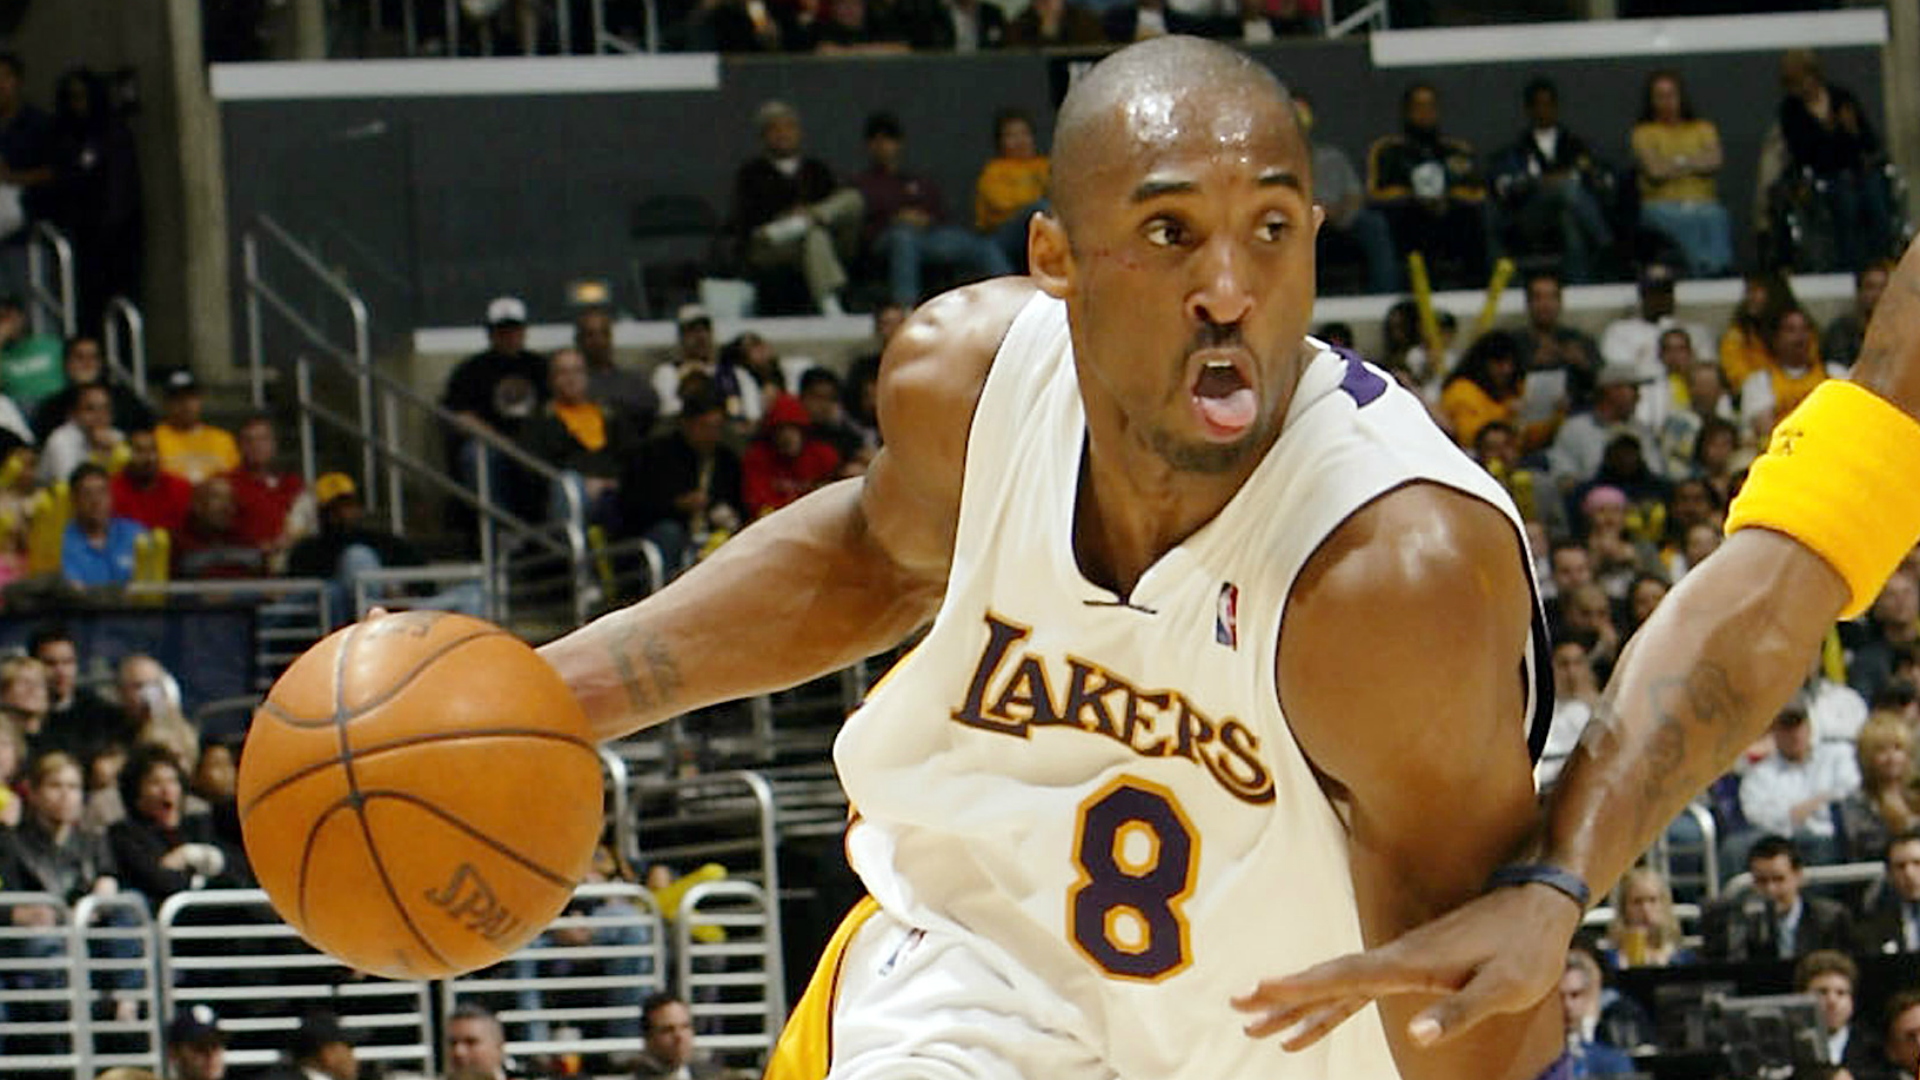 Kobe Bryant's 81-point game told in five videos | NBA | Sporting News1920 x 1080